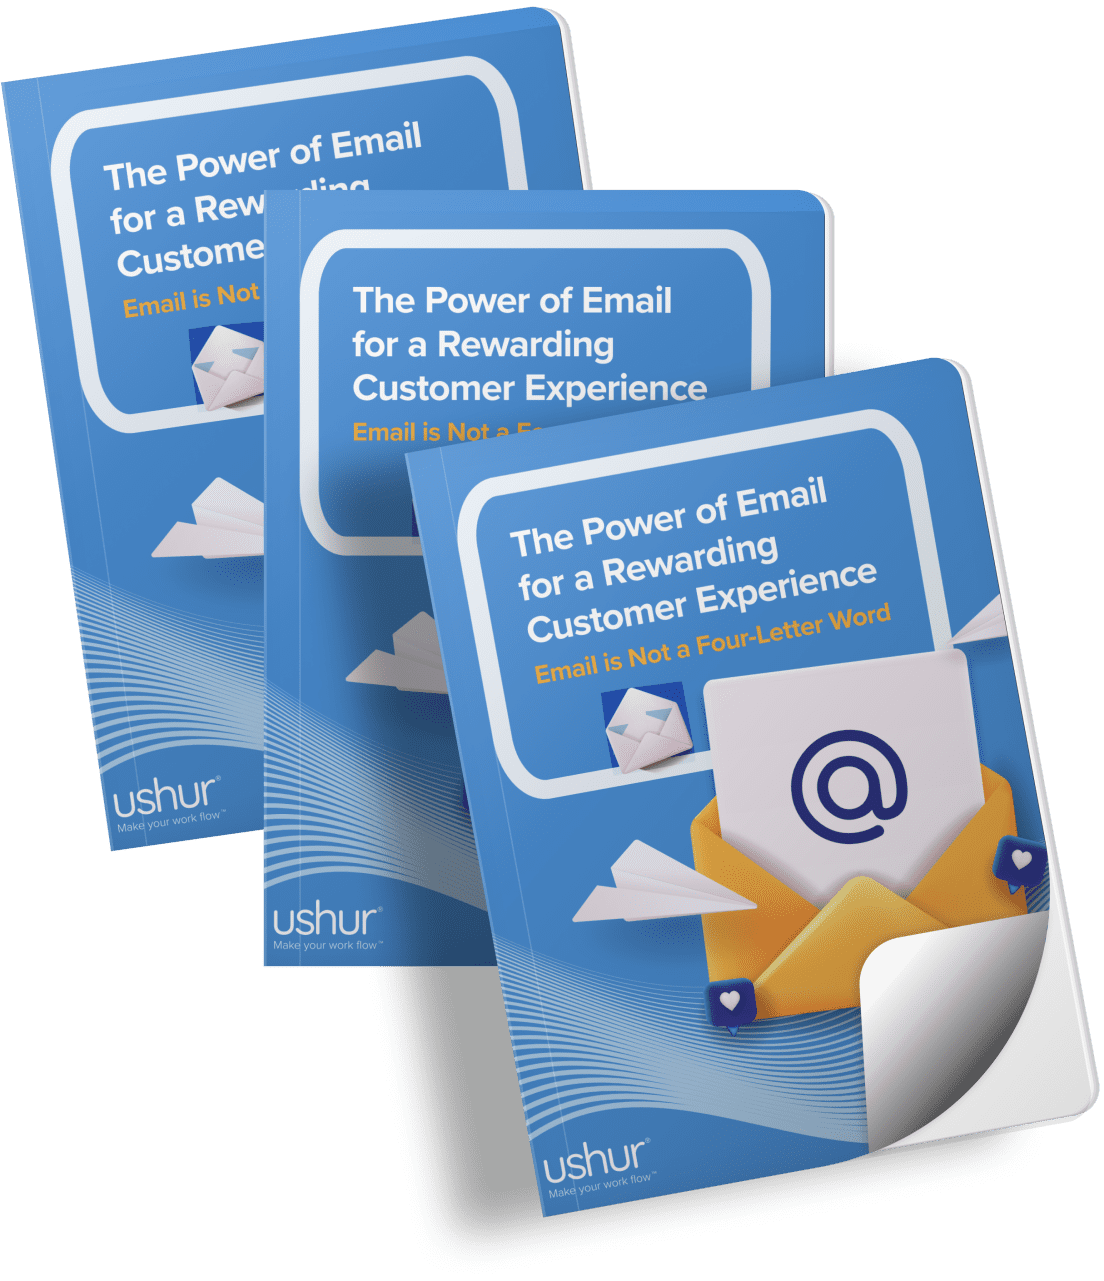 Power of Email: SmartMail eBook images